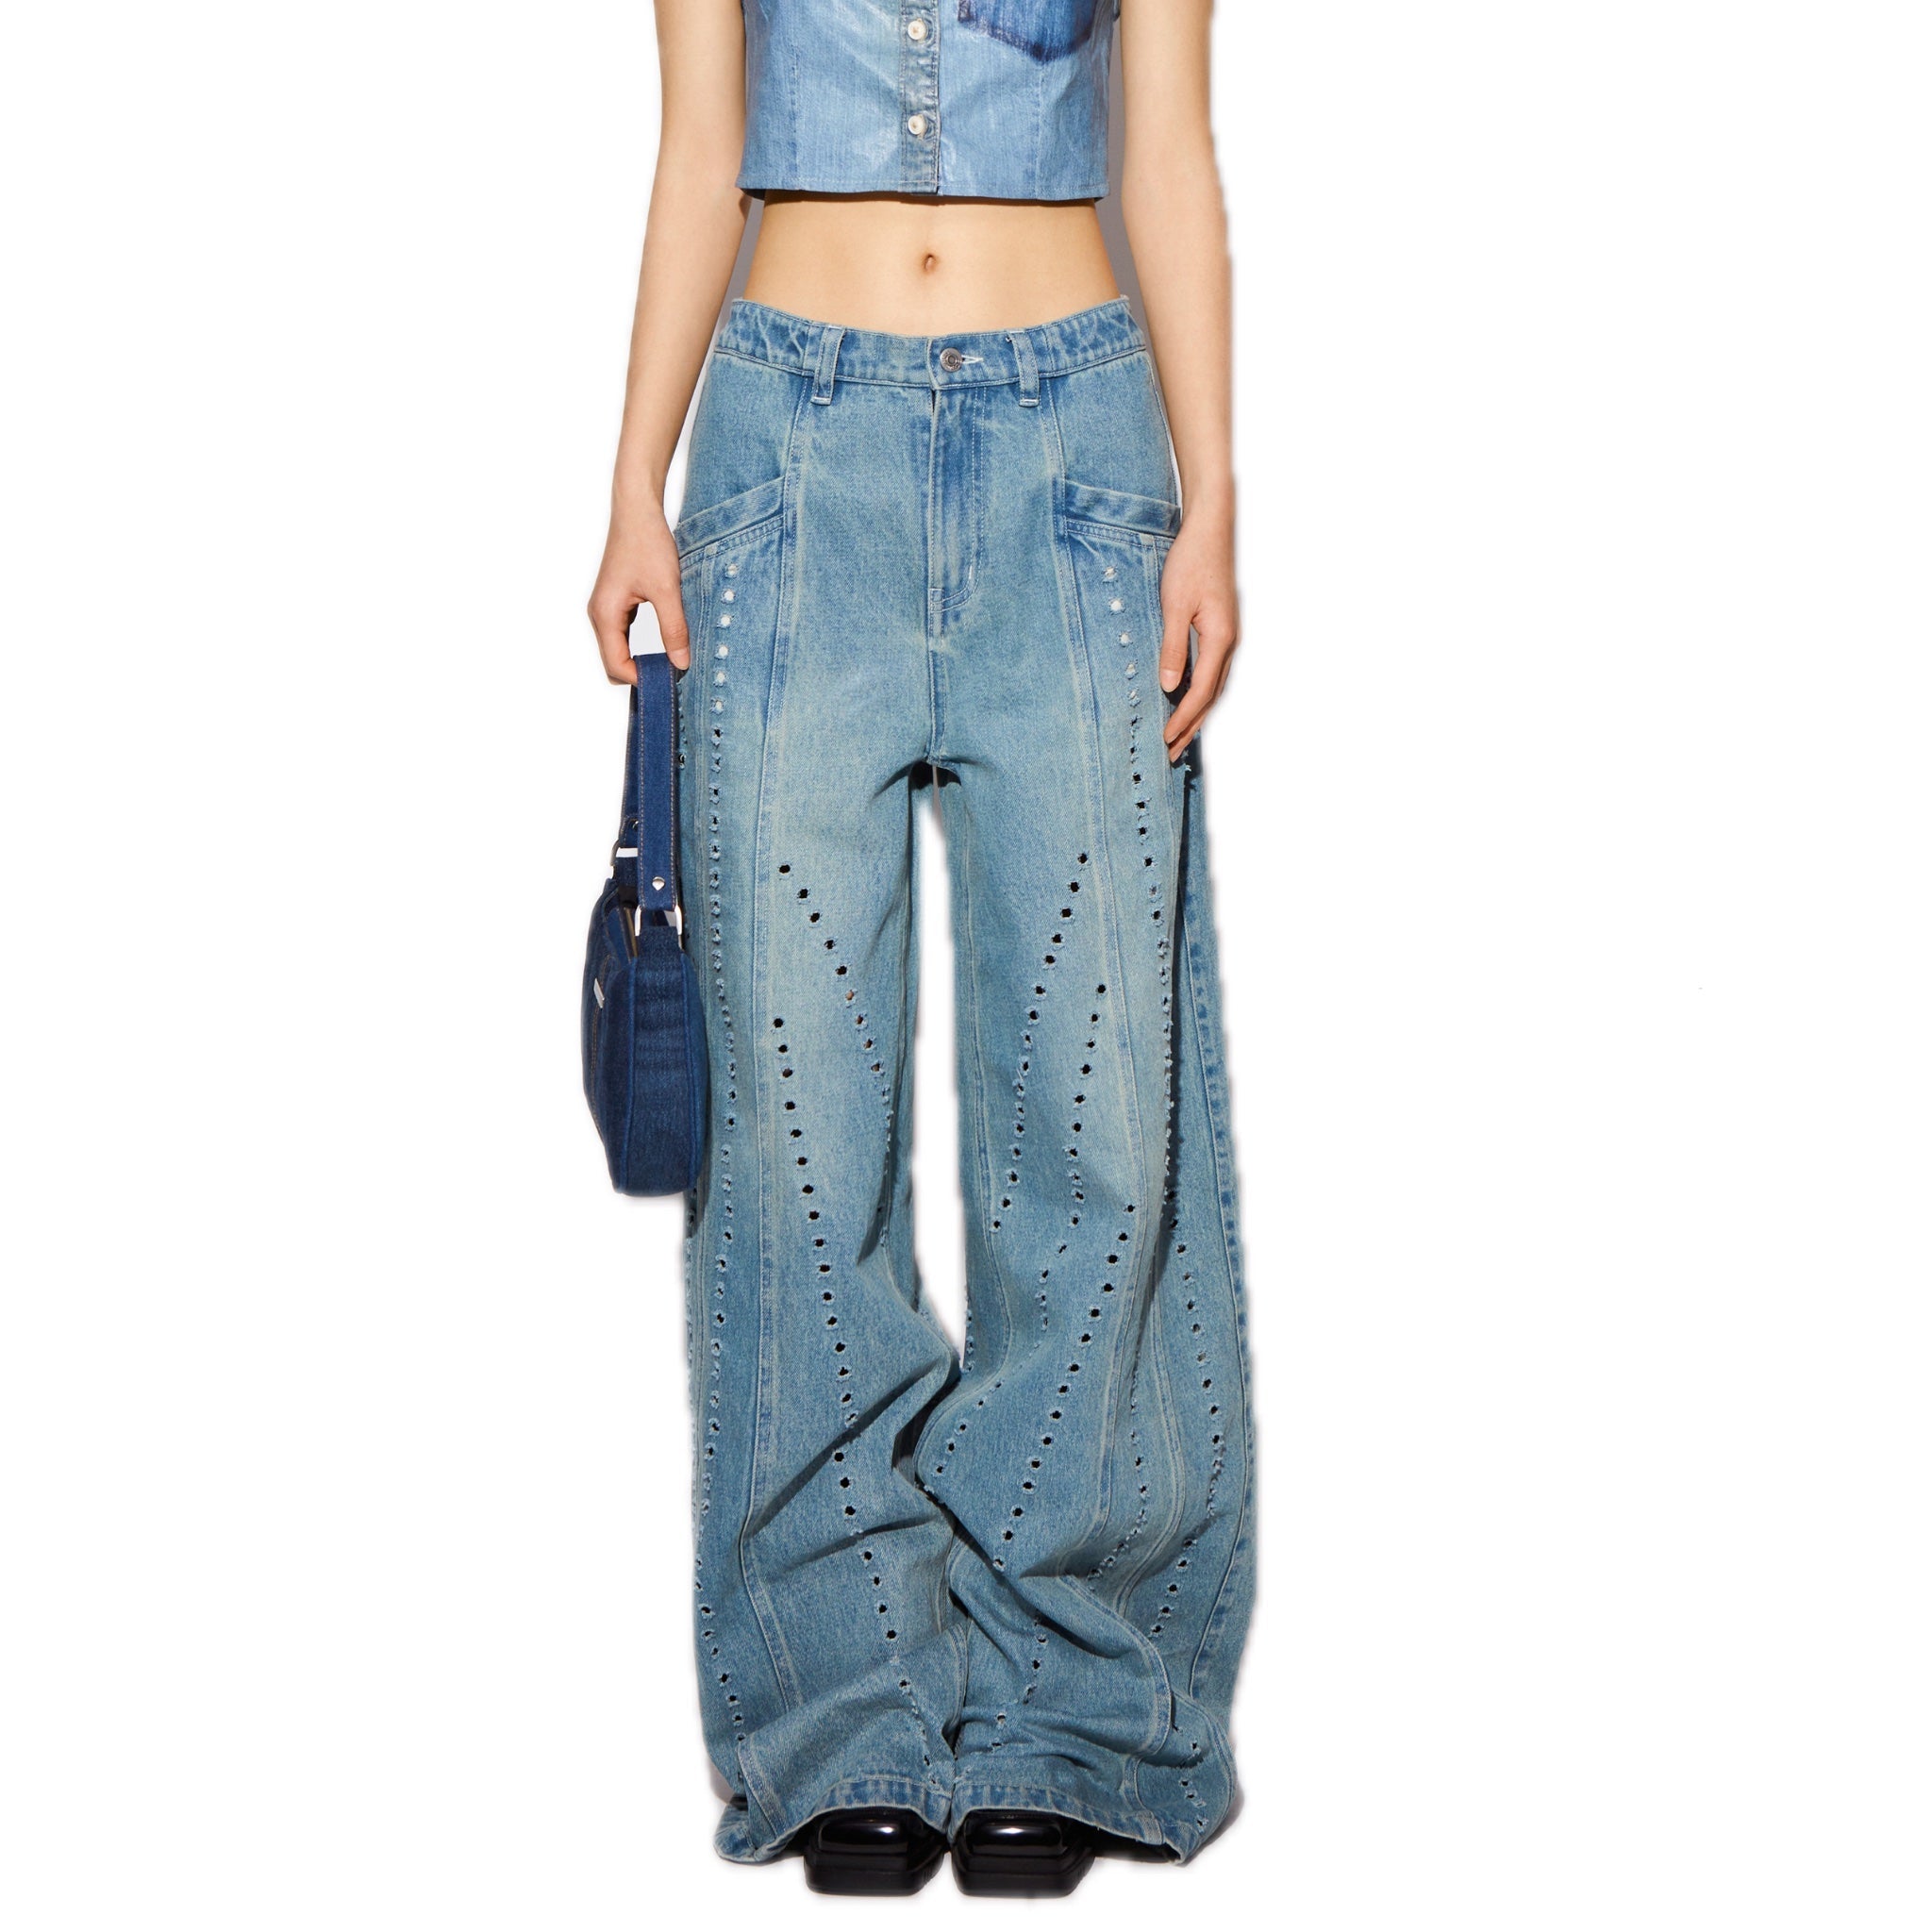 Blue Distressed Jeans with Dissected Lines